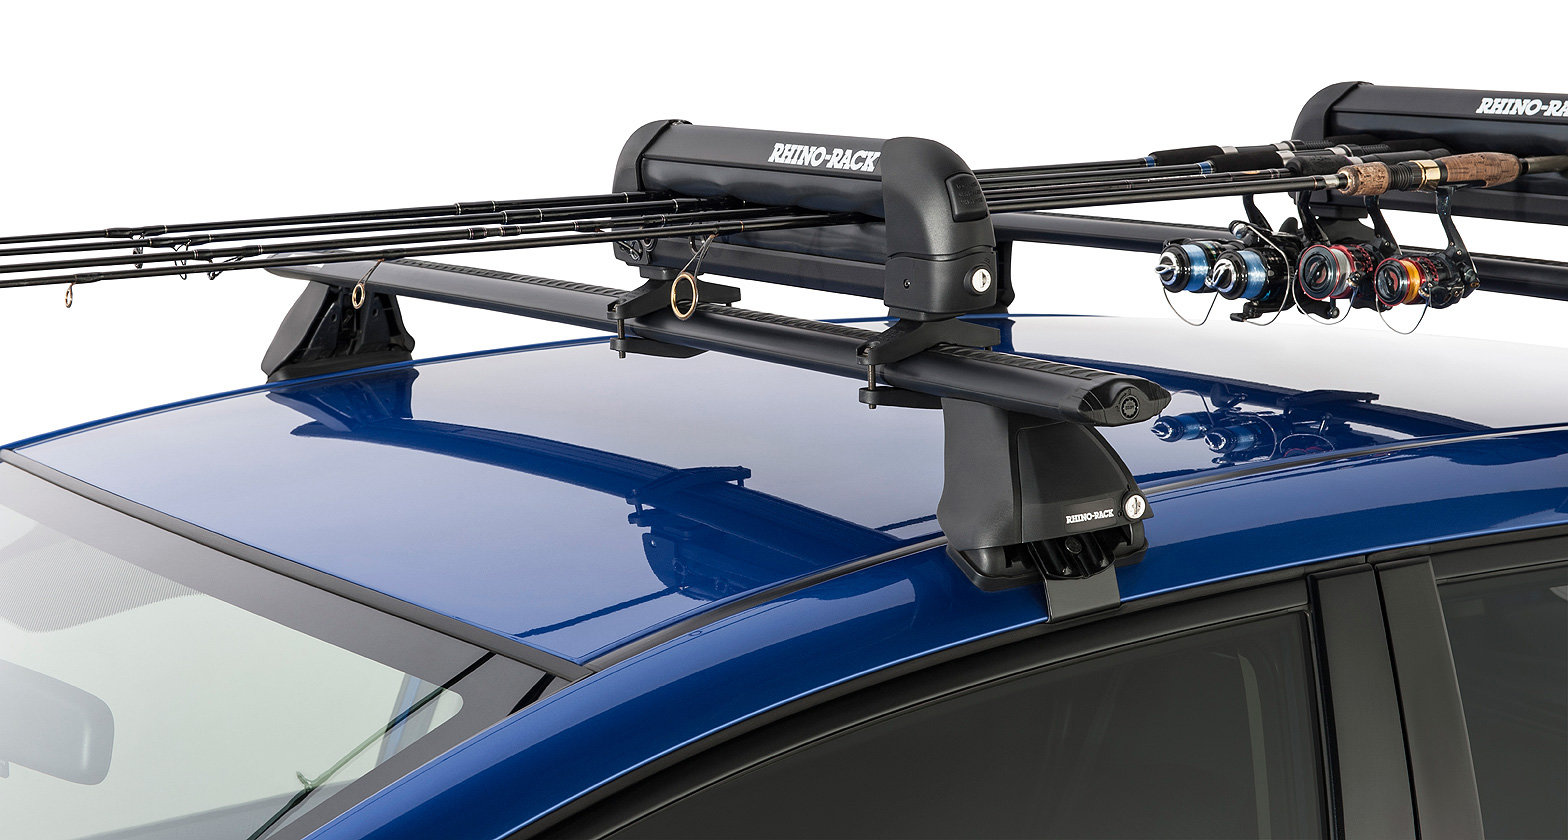 Rooftop Fishing Pole Carrier Best Sale - anuariocidob.org 1687232056